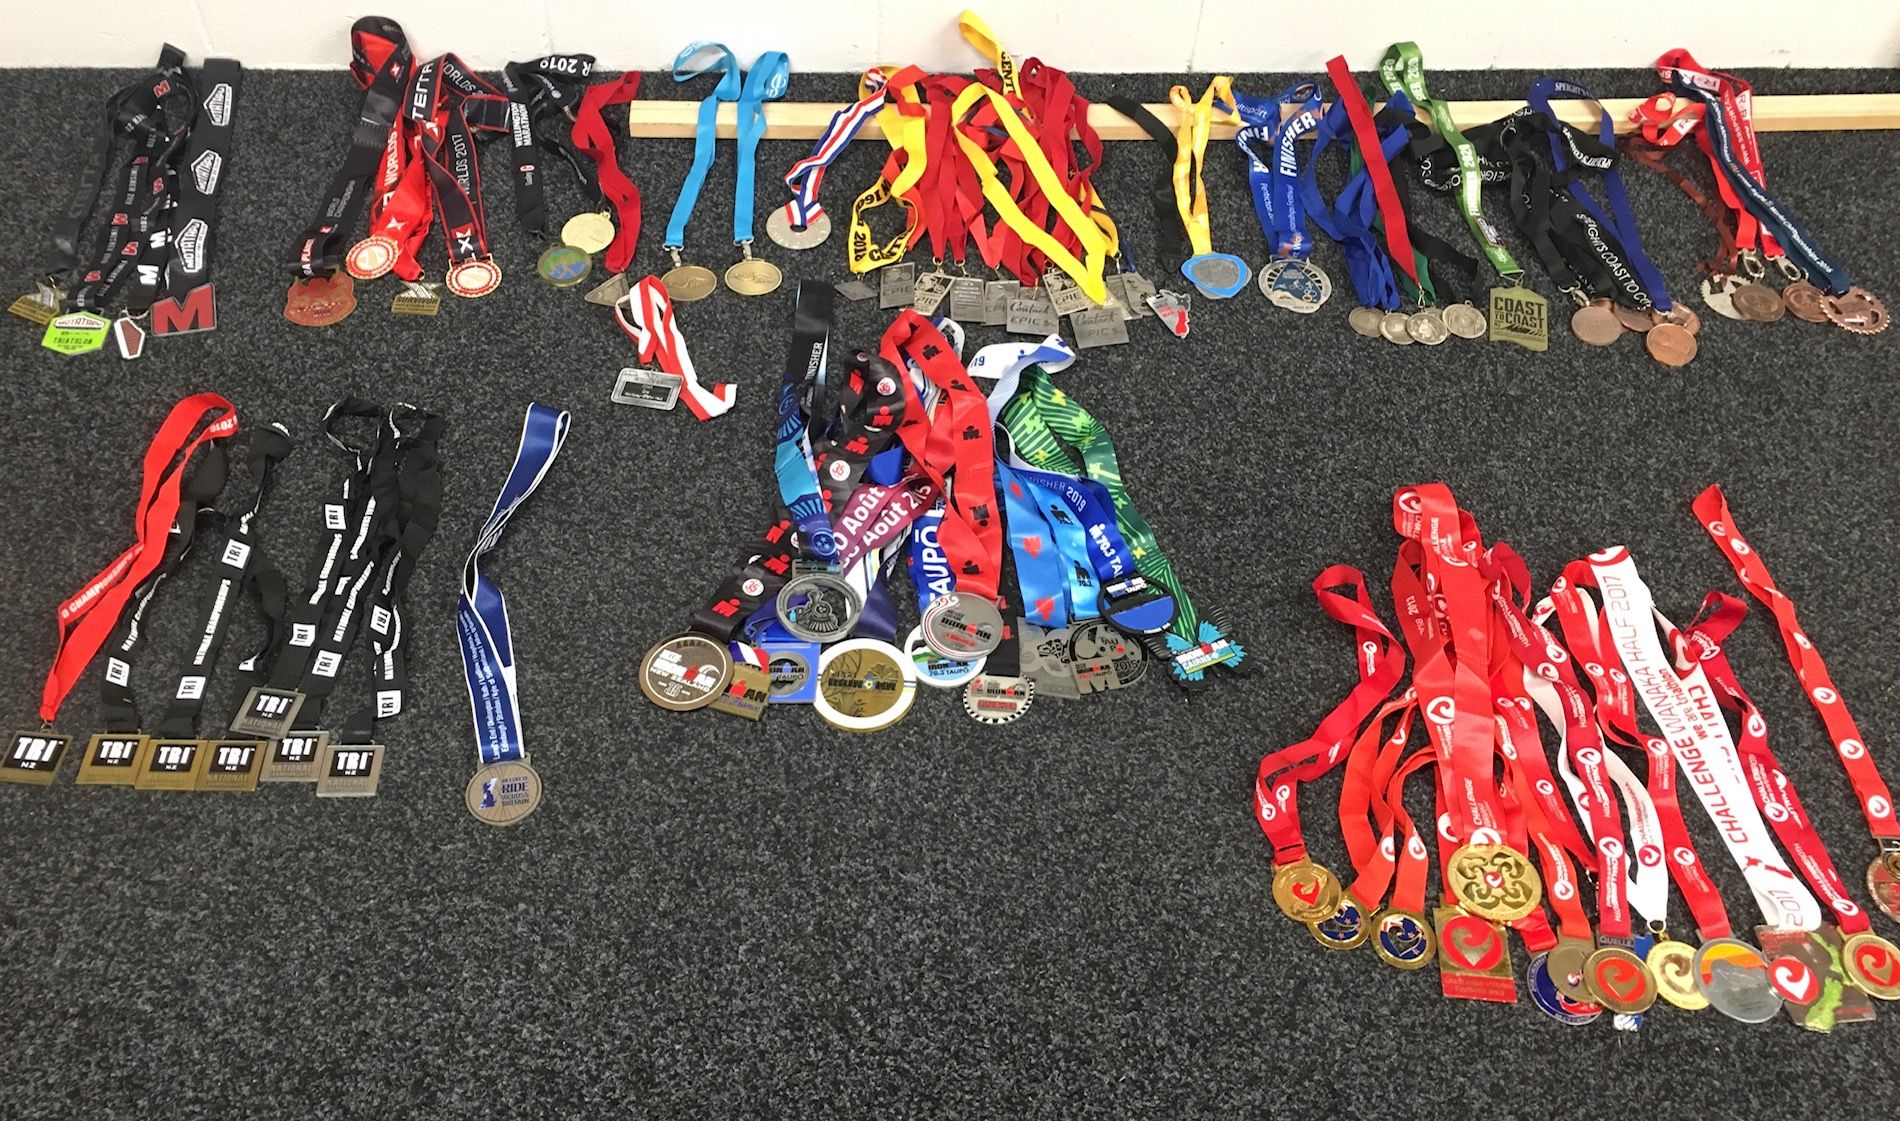 How many Challenge Wanaka medals can you count?